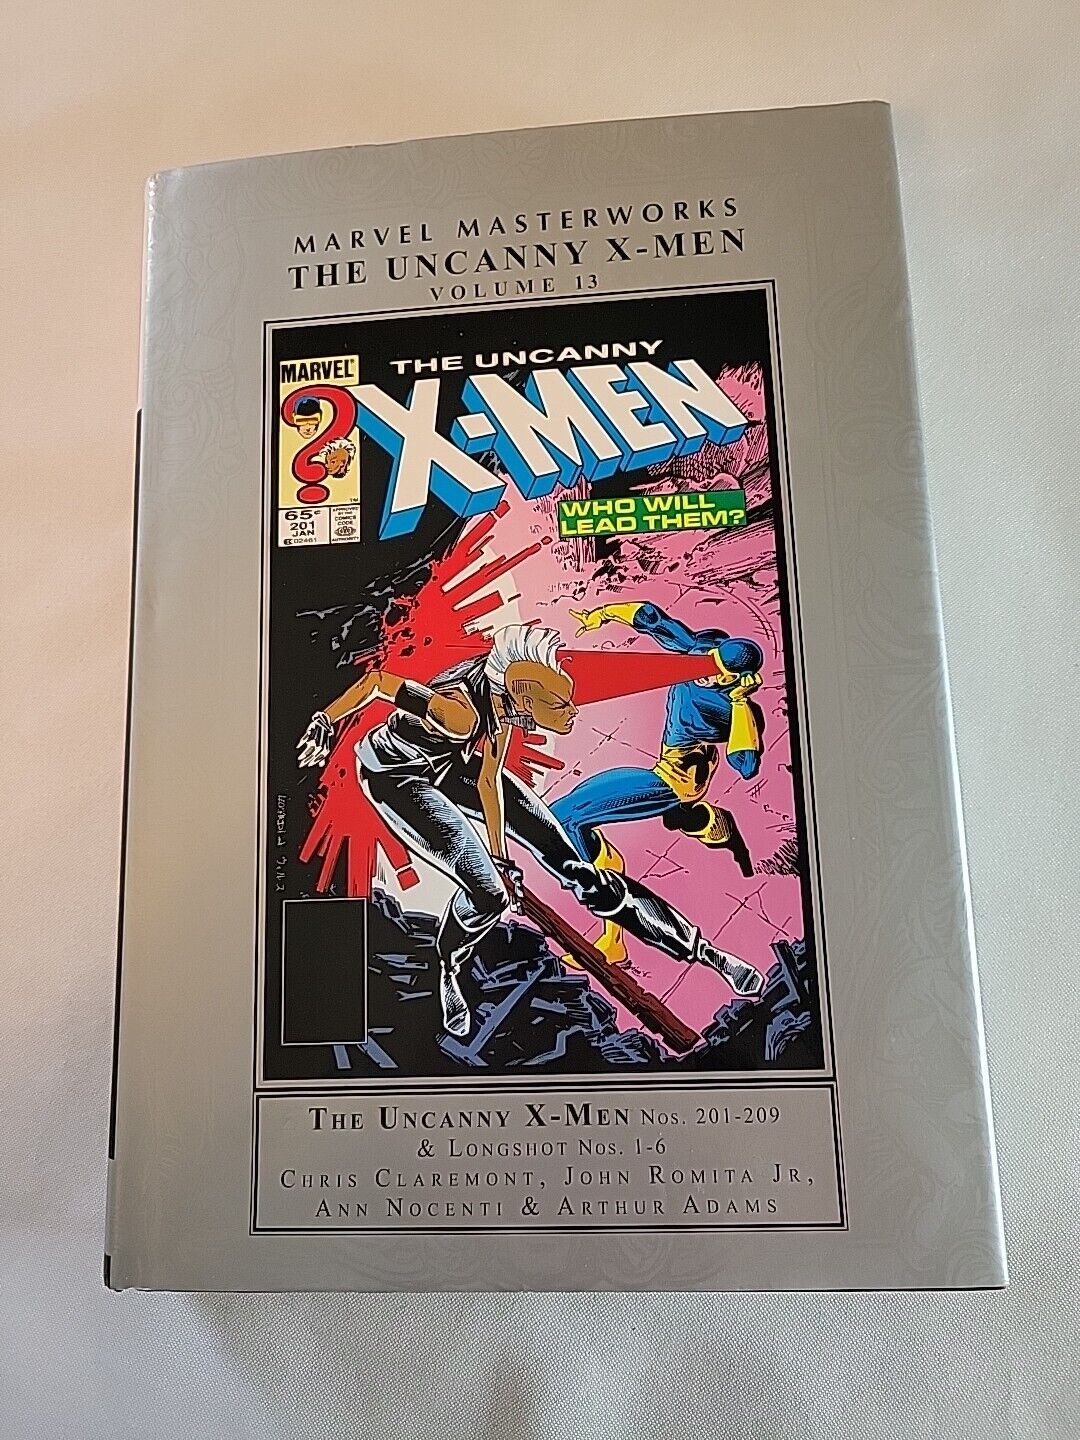 Uncanny X-Men Volume 13 Hardcover Who Will Lead Them Nice Condition 